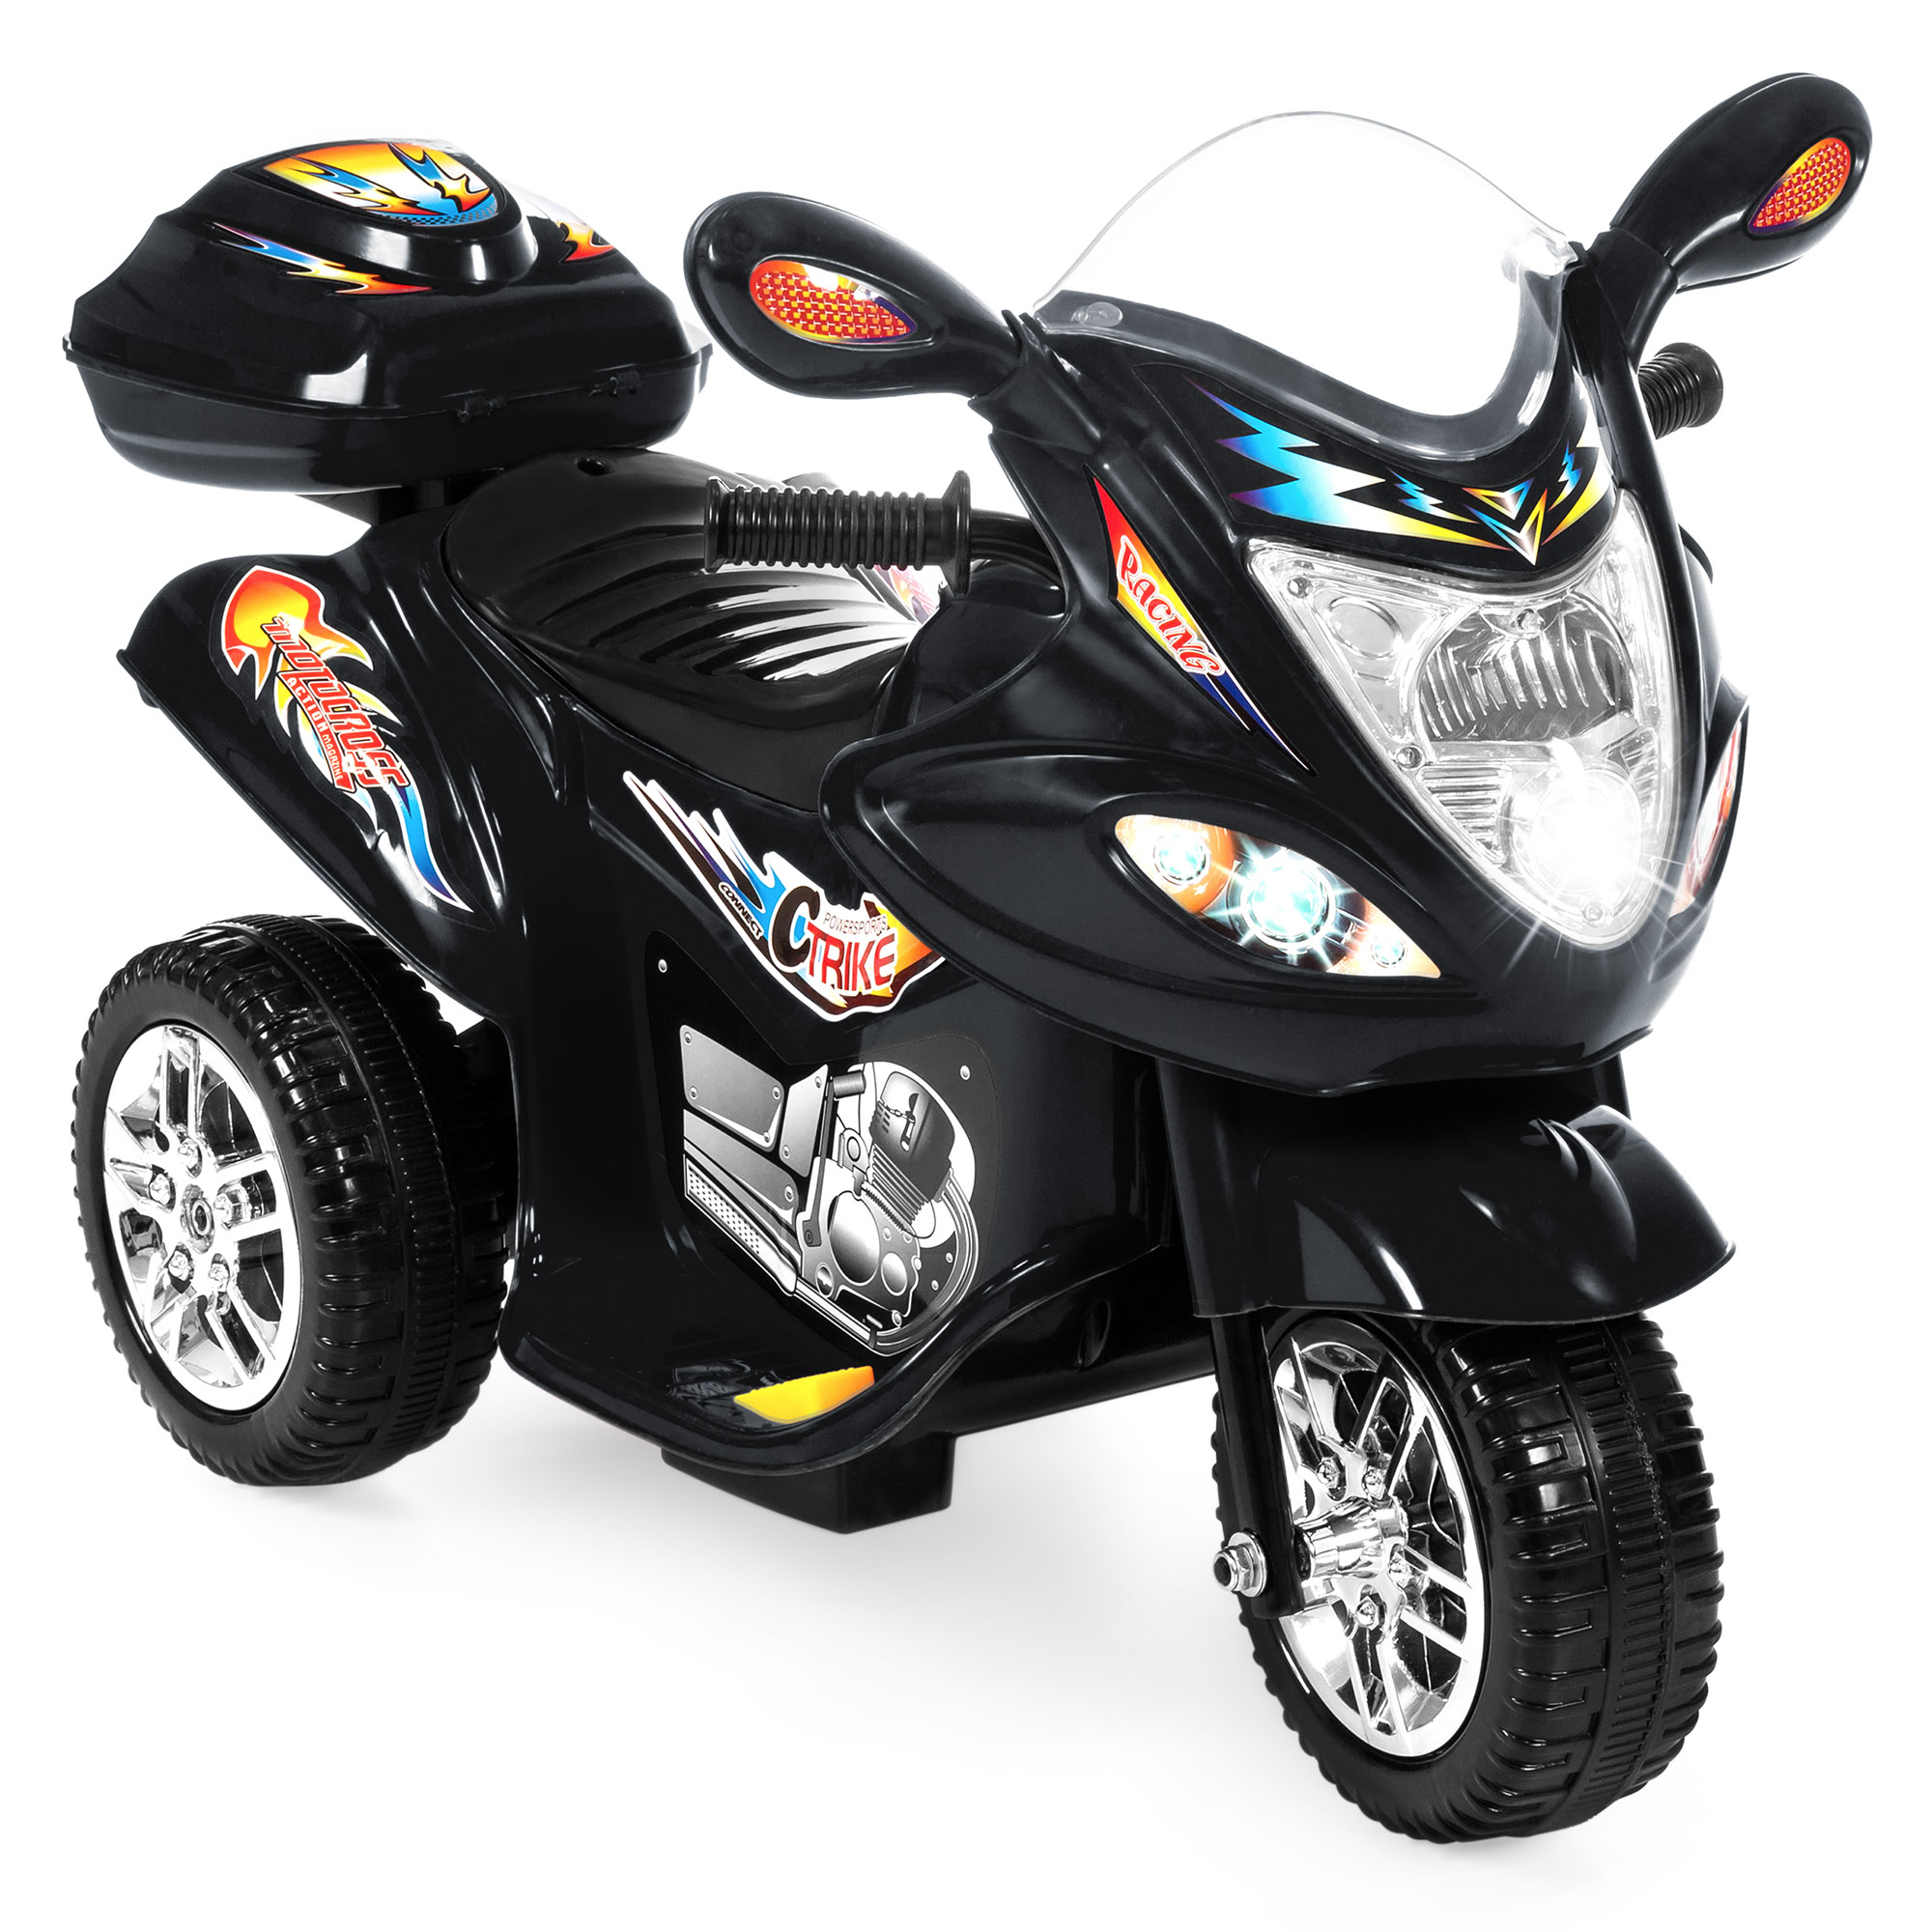 Best Choice Products 6V Kids Battery Powered 3-Wheel Motorcycle Ride On Toy w/ LED Lights, Music, Horn, Storage - Black - image 1 of 6